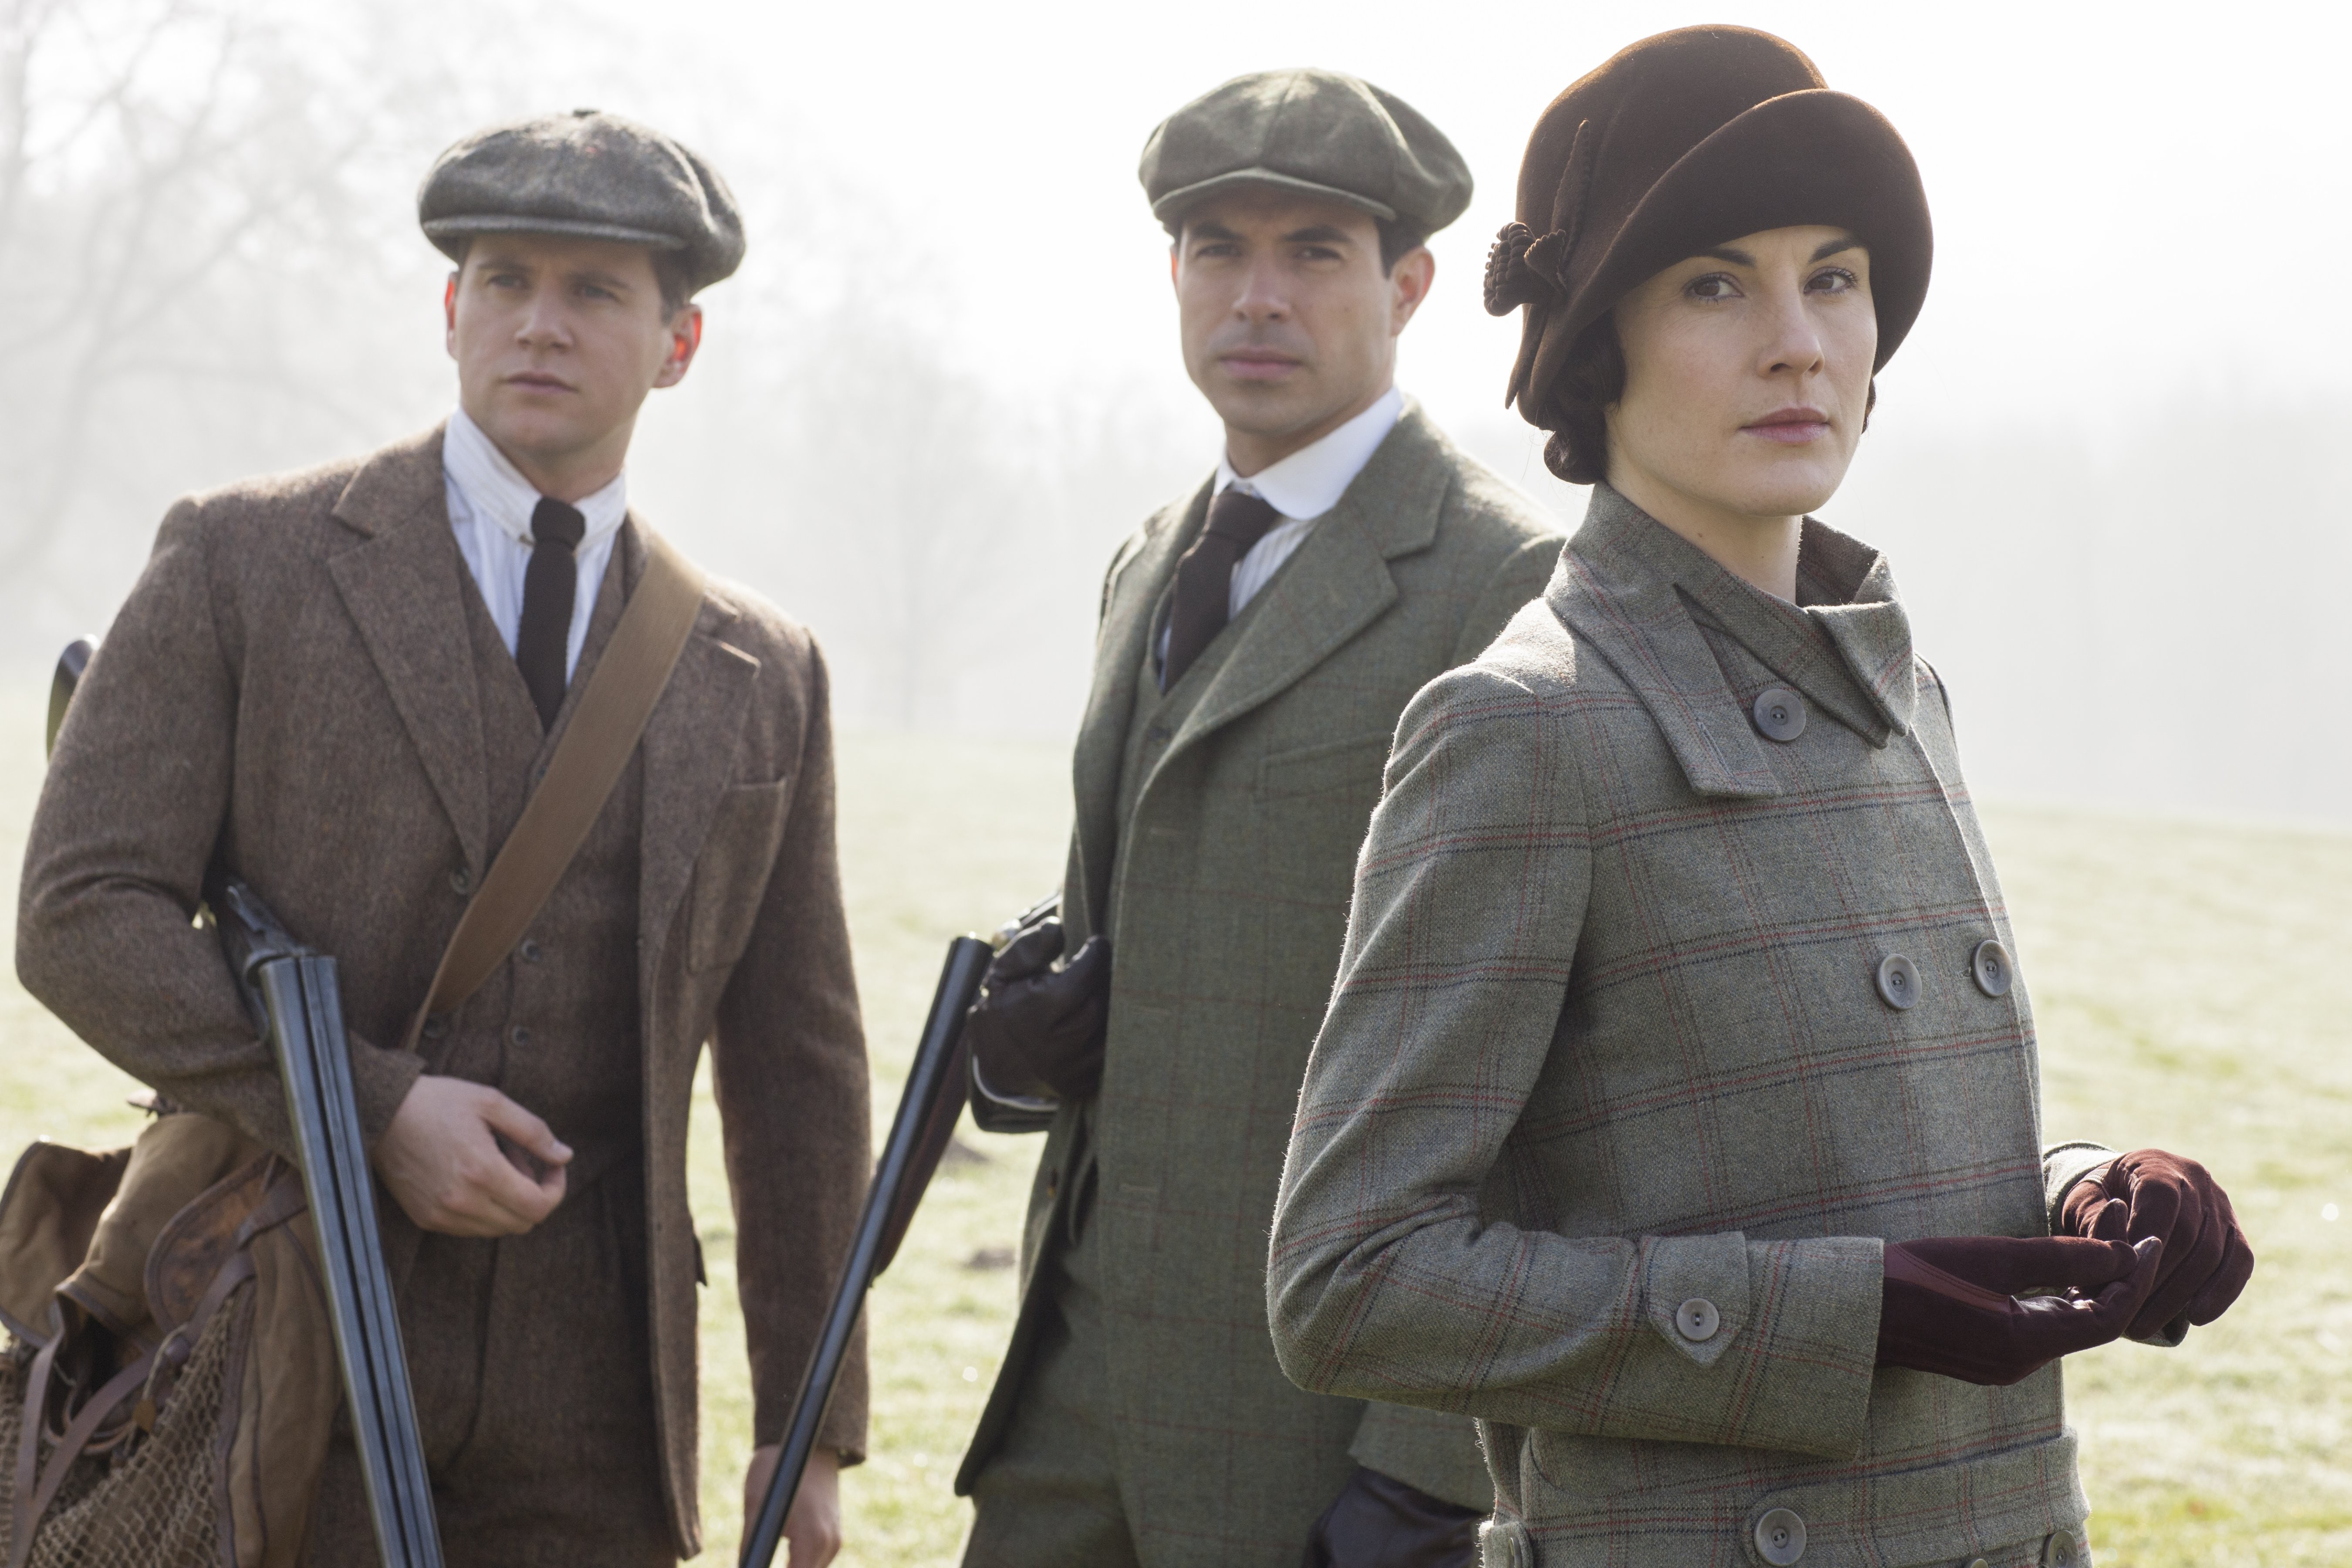 (From left) Allen Leech as Tom Branson, Tom Cullen as Anthony Foyle, and Michelle Dockery as Lady Mary Crawley in Downton Abbey. Dockery’s performance in the series earned her nominations for a clutch of awards.